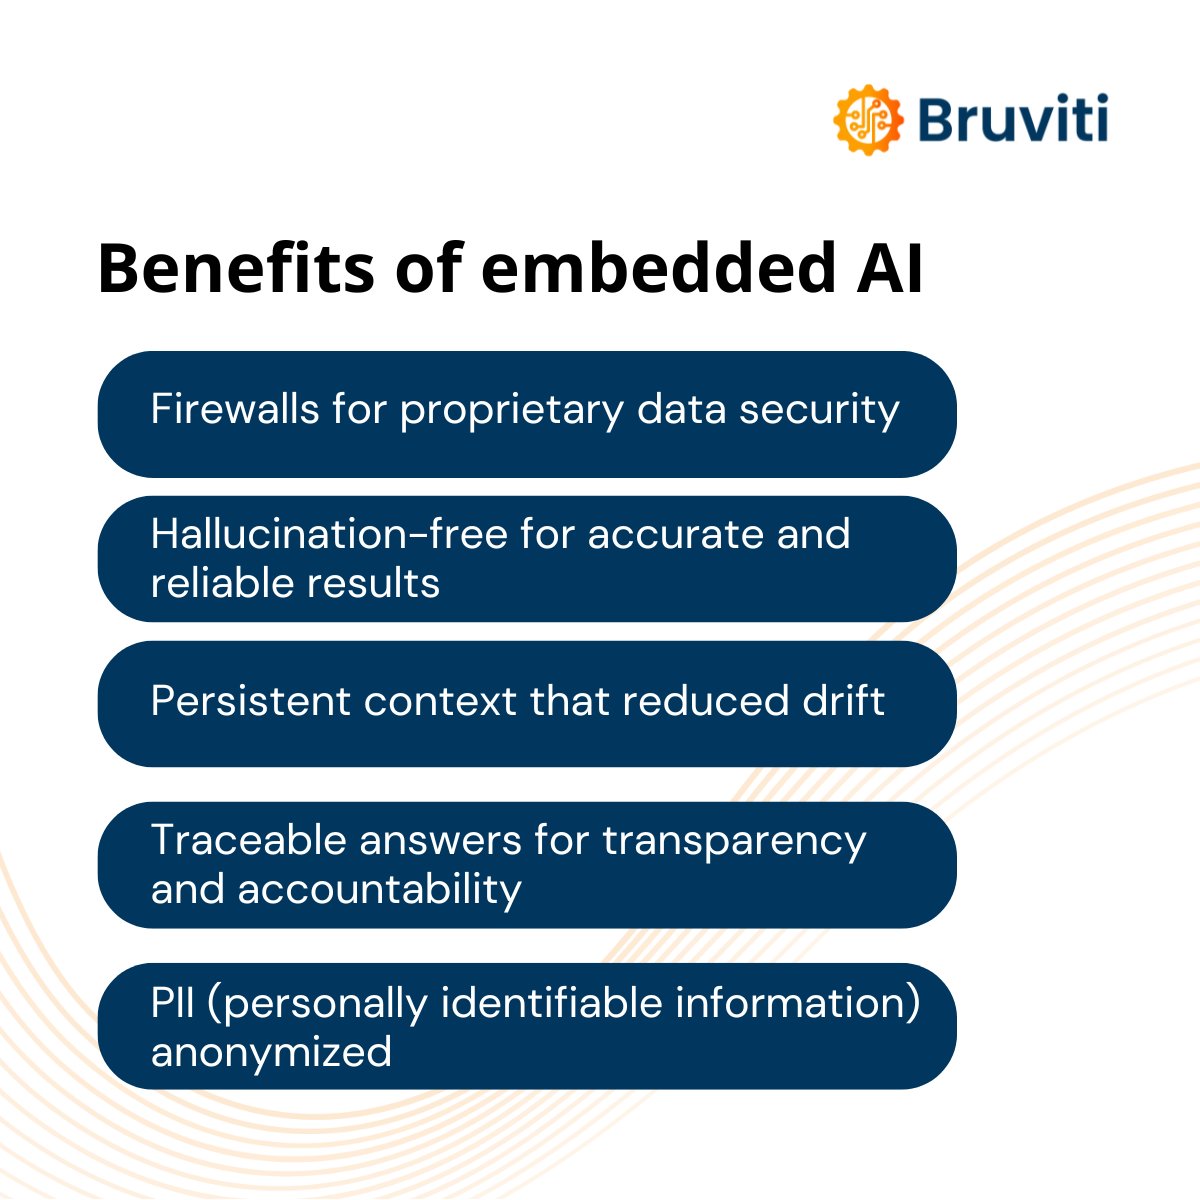 Deploy #Bruviti’s domain-specialized AI within 5-7 weeks and take control of your AI journey. #AI #DataTransformation #RT #firewall #cx